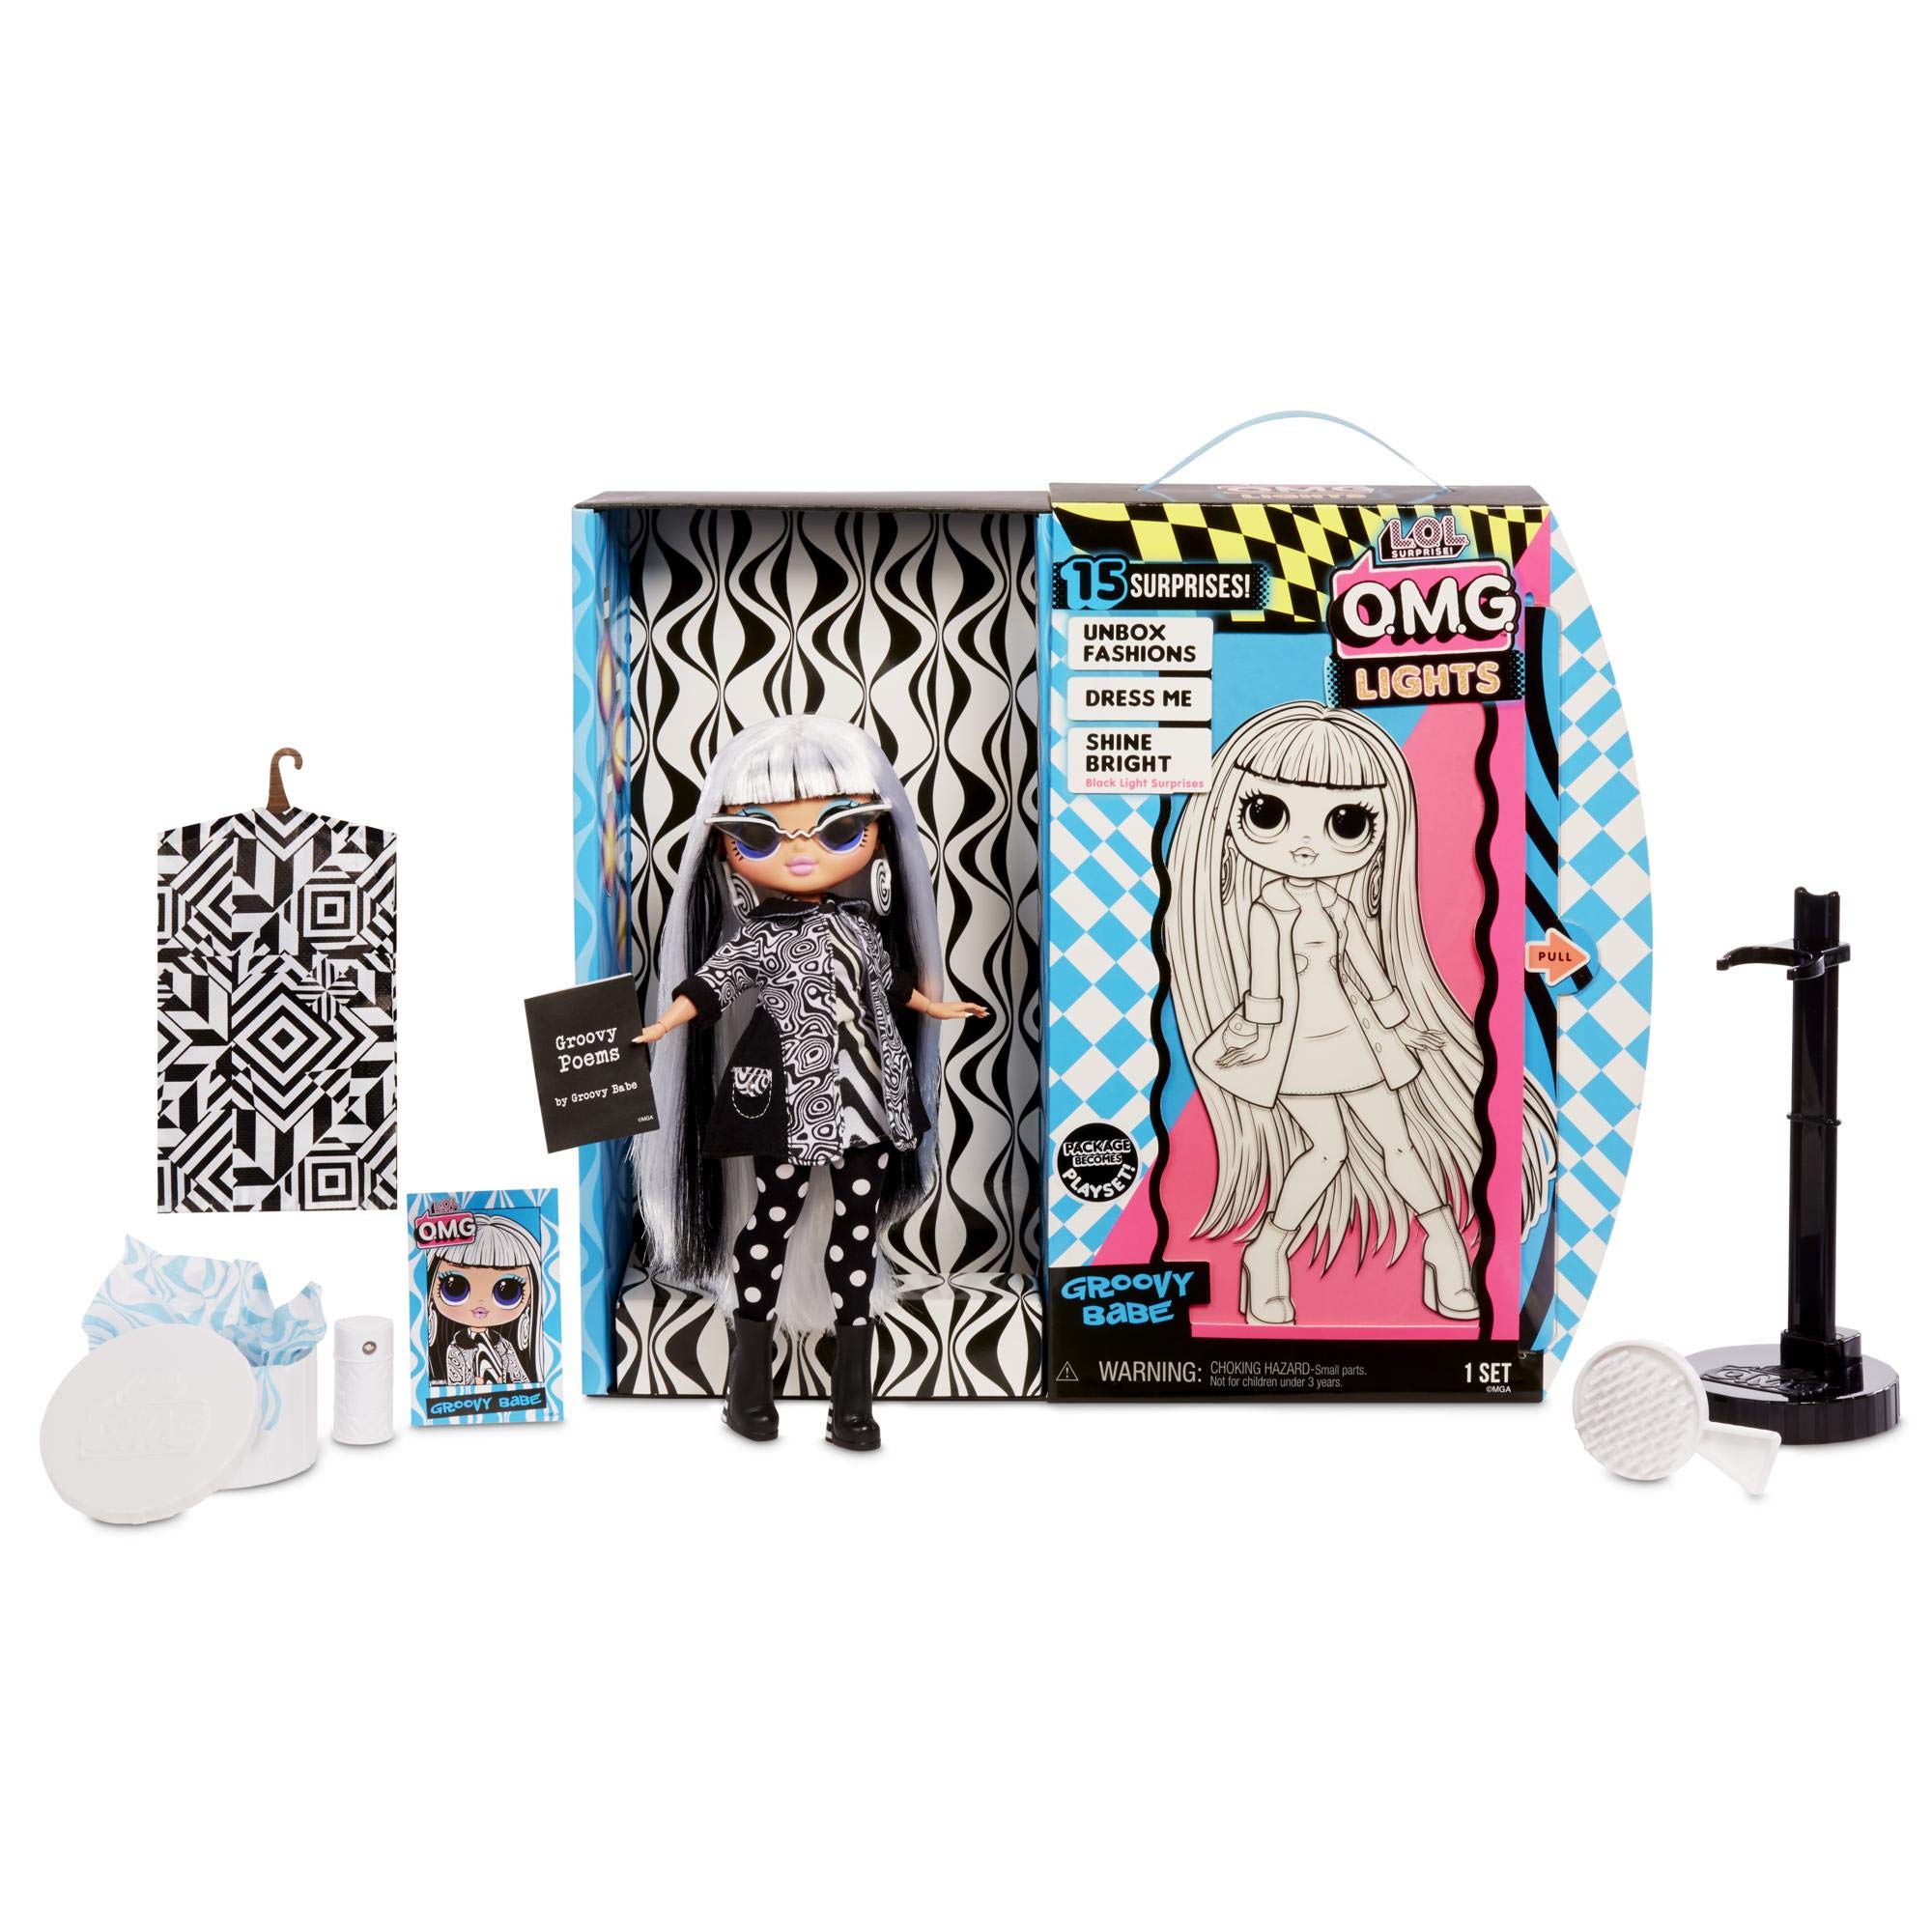 LOL Surprise OMG Lights Groovy Babe Fashion Doll with 15 Surprises Accessories Set | Includes Fashion Doll and Magic Black Light Surprises| Great Gift for Girls | Collectible